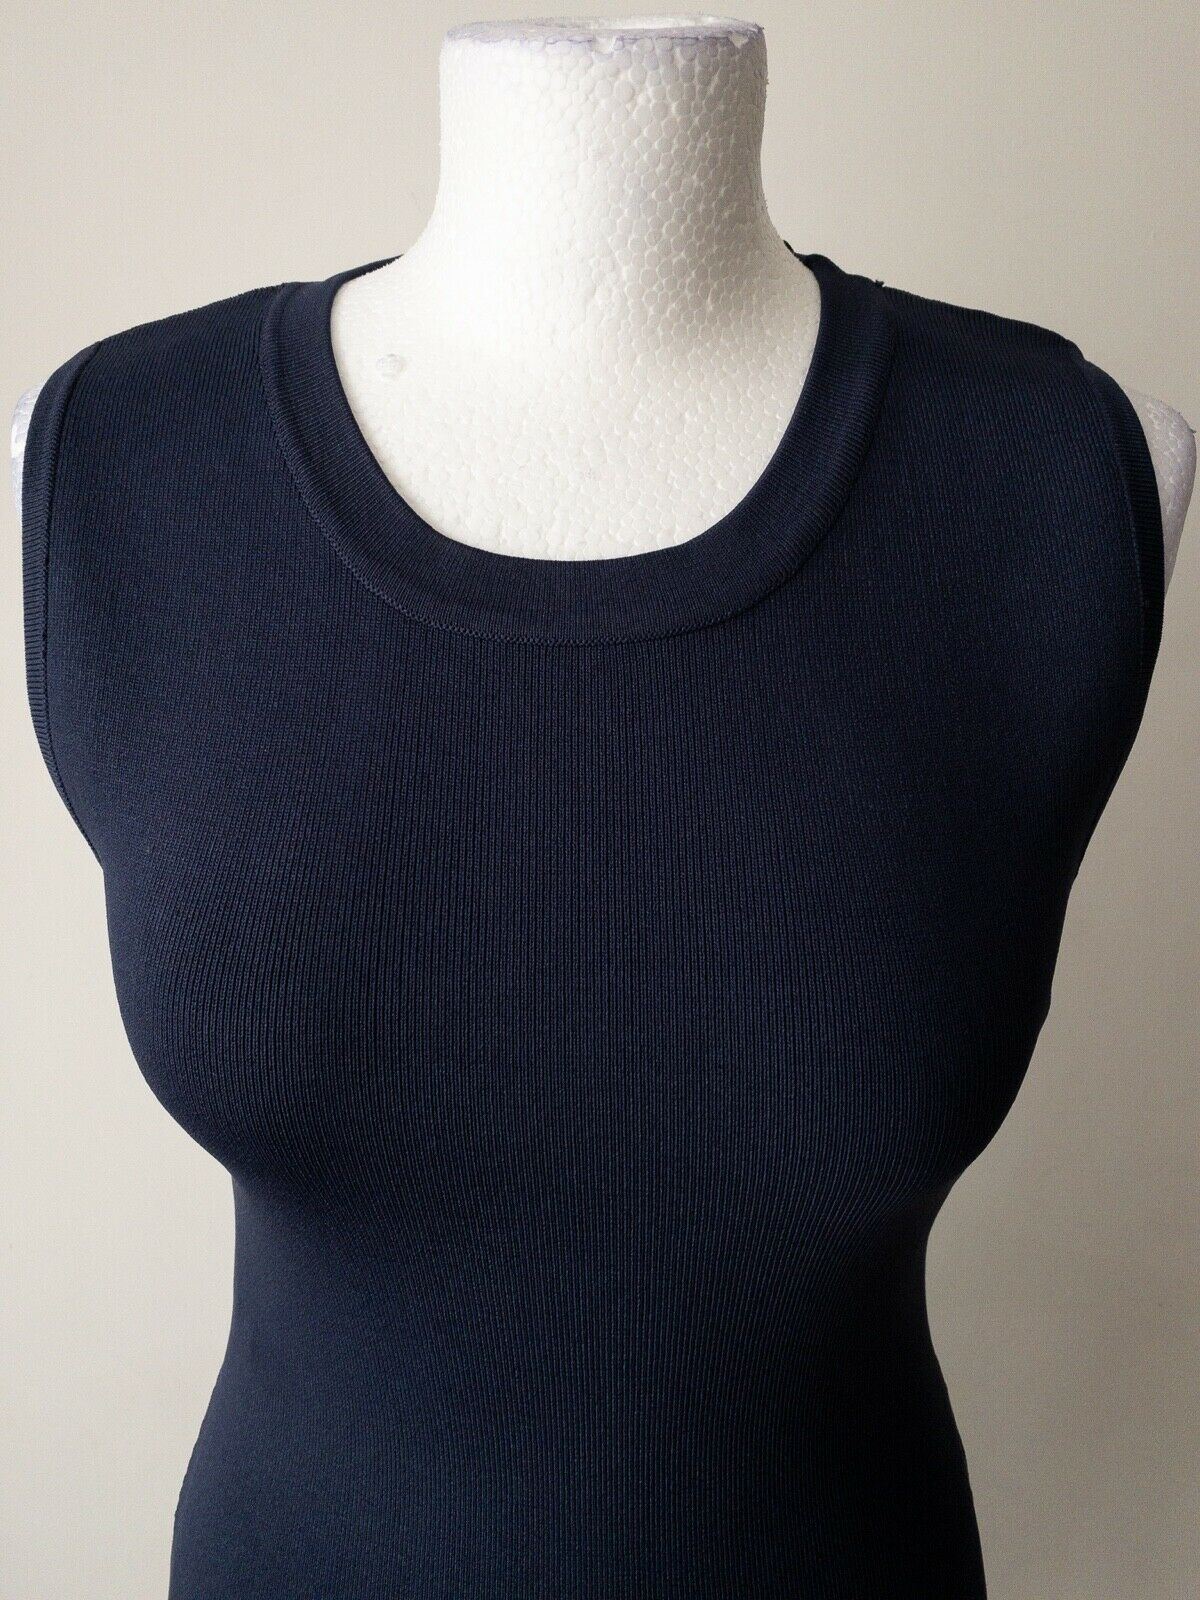 WOW Couture Navy Ribbed Sleeveless Bodycon Dress Cutout back Size L 10